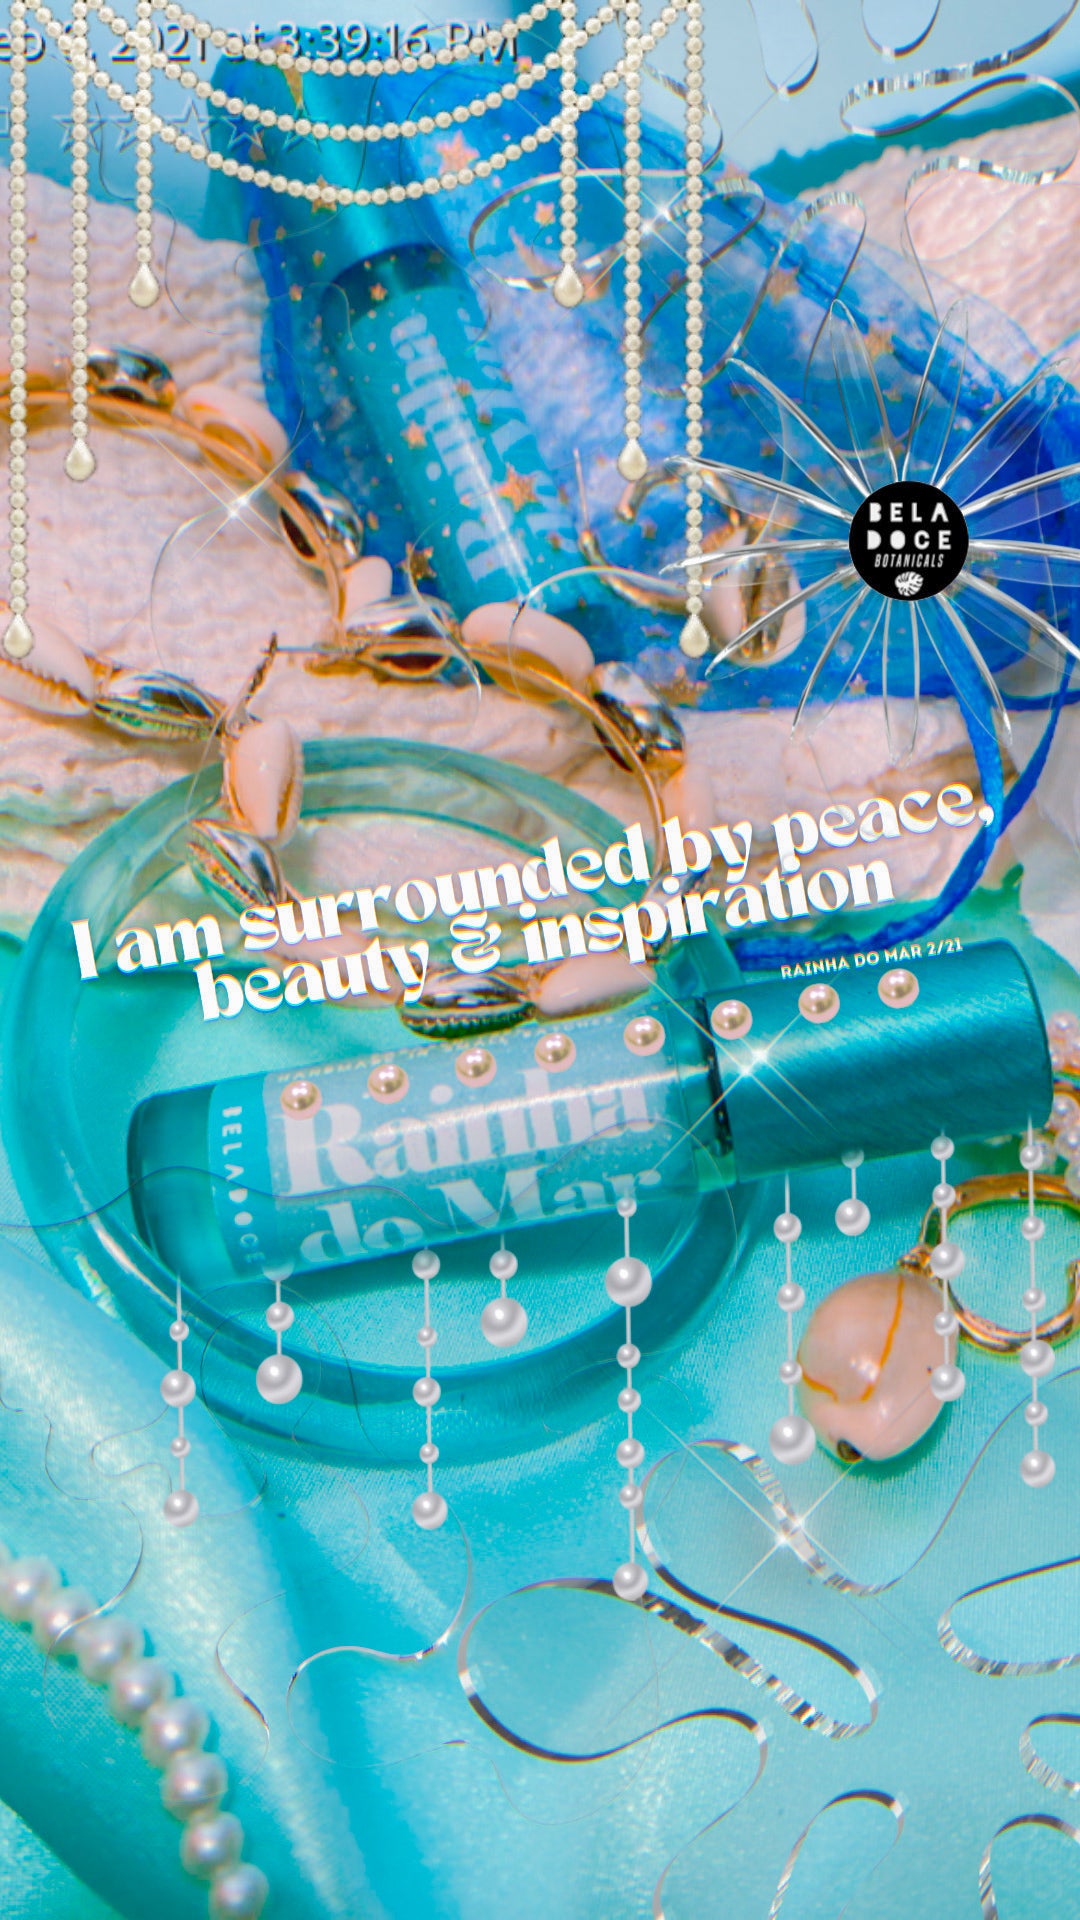 I am surrounded by peace beauty and inspiration. image description2020 photo by beladoce botanicals featuring a flatlay on turquoise satin, pearl clips necklaces and accessories, and two beladoce botanicals rainha do mar fragrance rollerballs